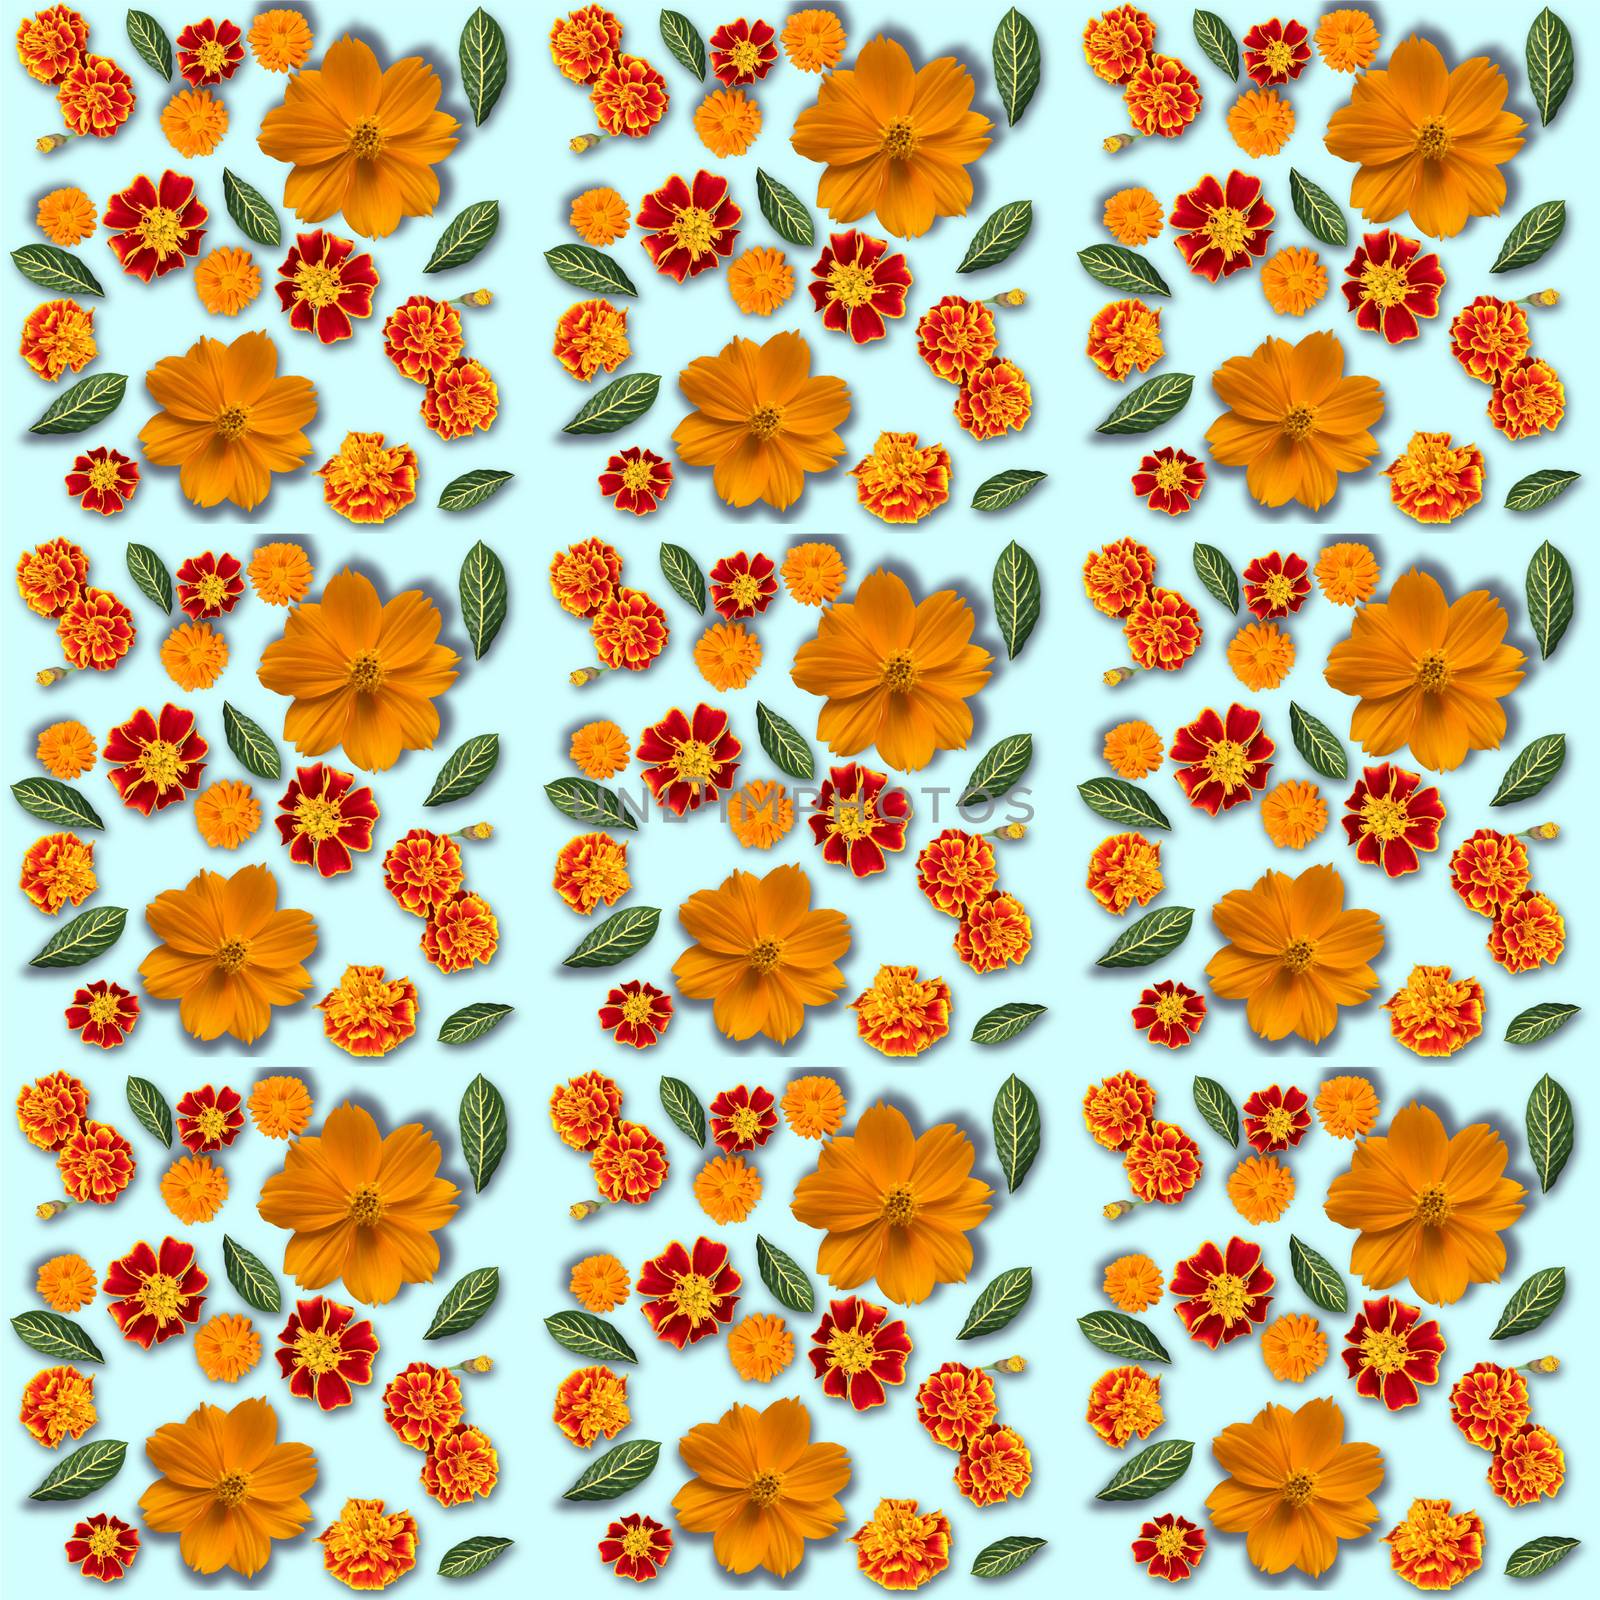 Yellow flowers pattern on a blue background. Cosmos, marigold and calendula flowers composition. Top view.